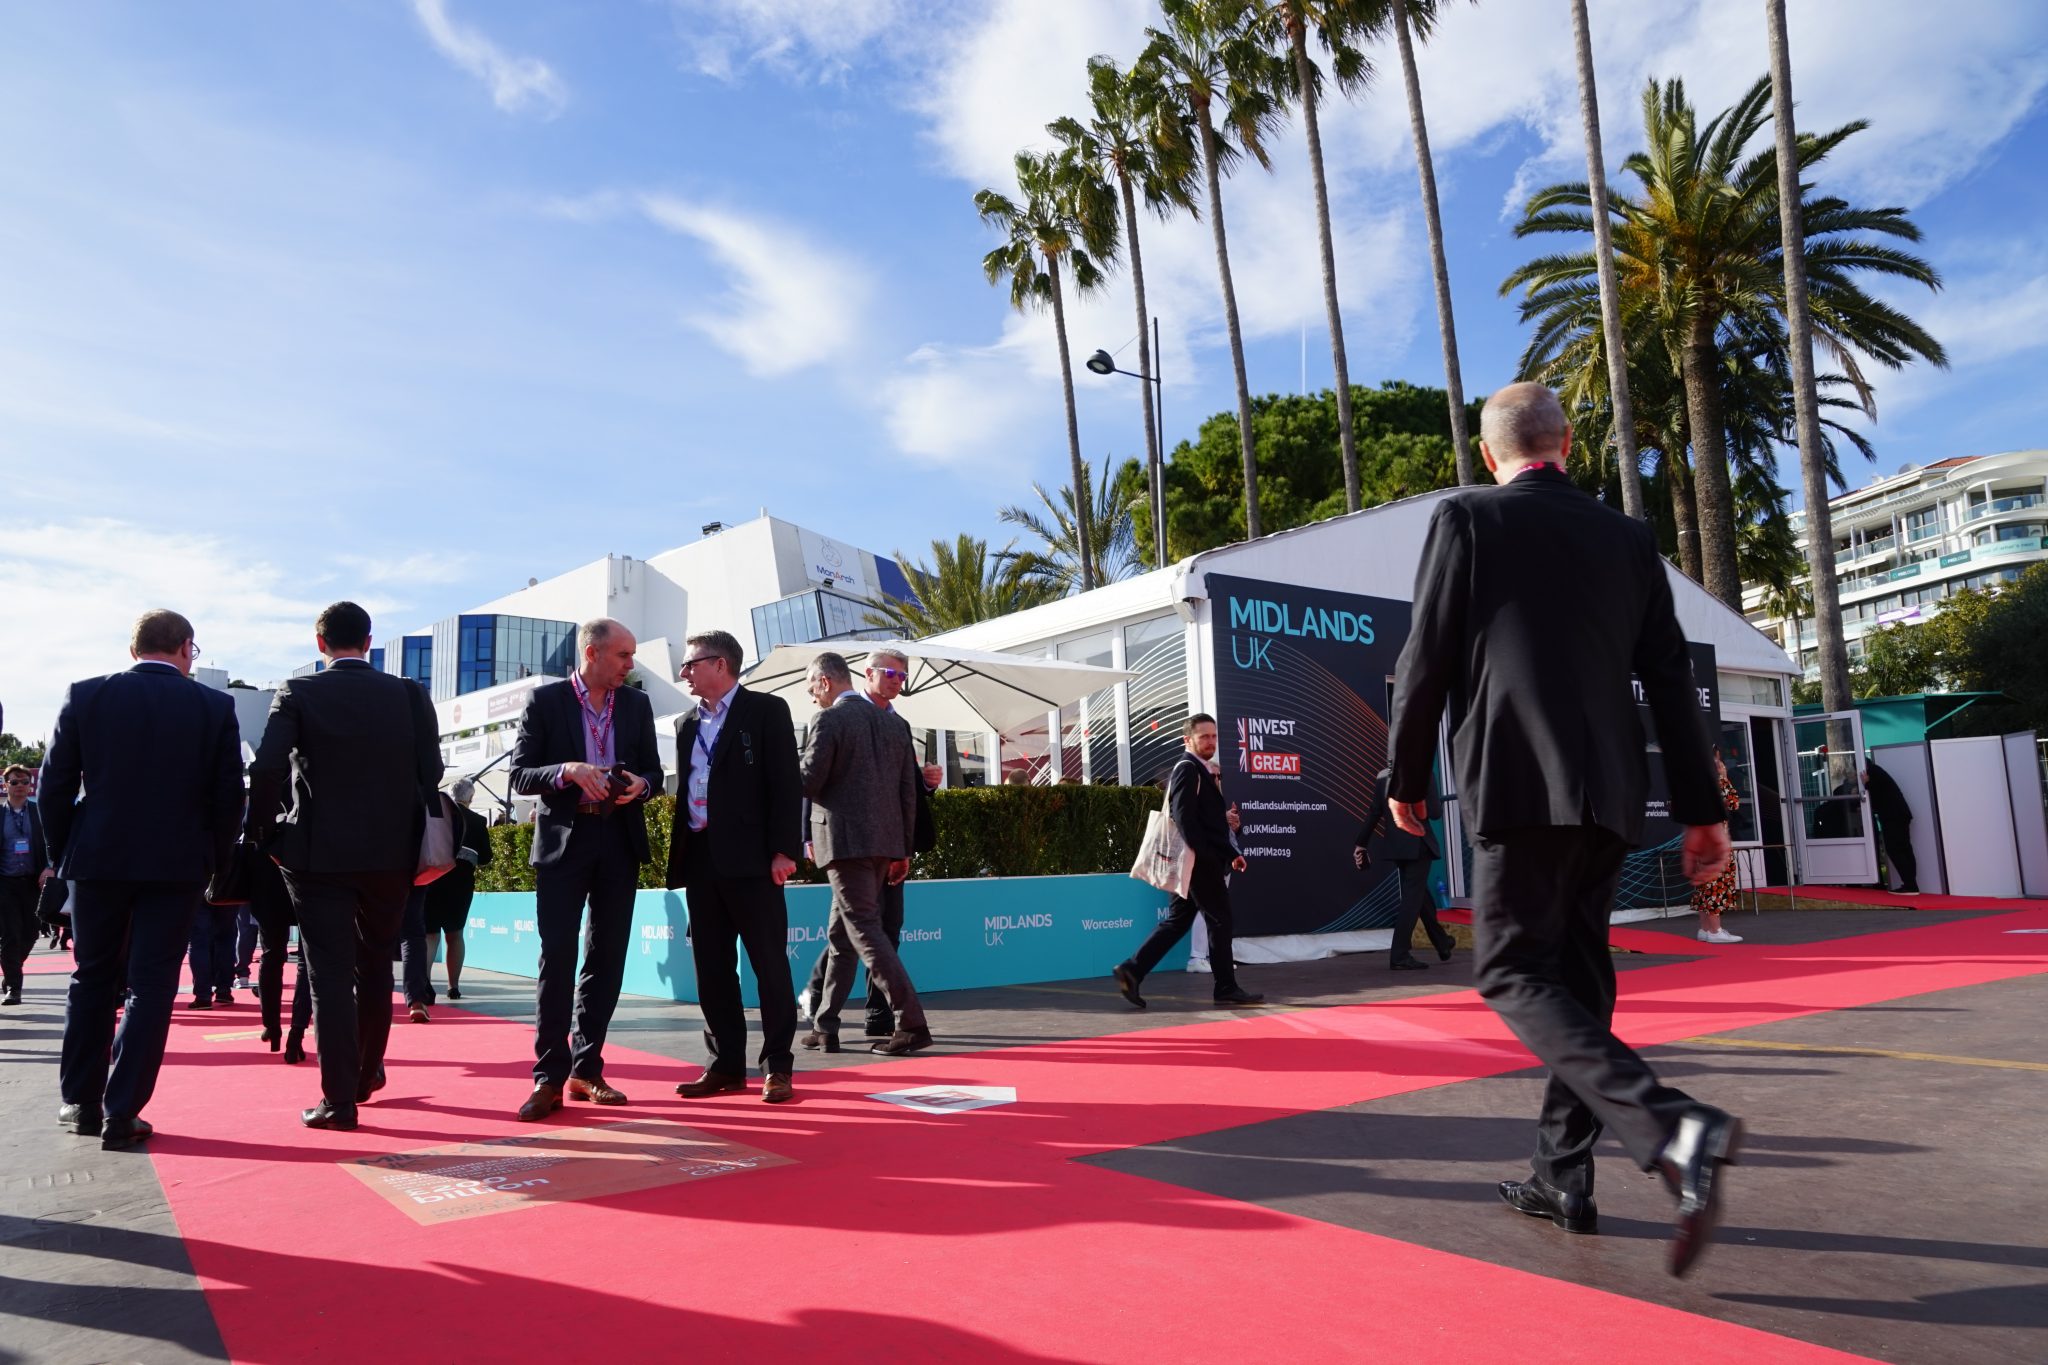 The Midlands UK stand at last year's MIPIM event